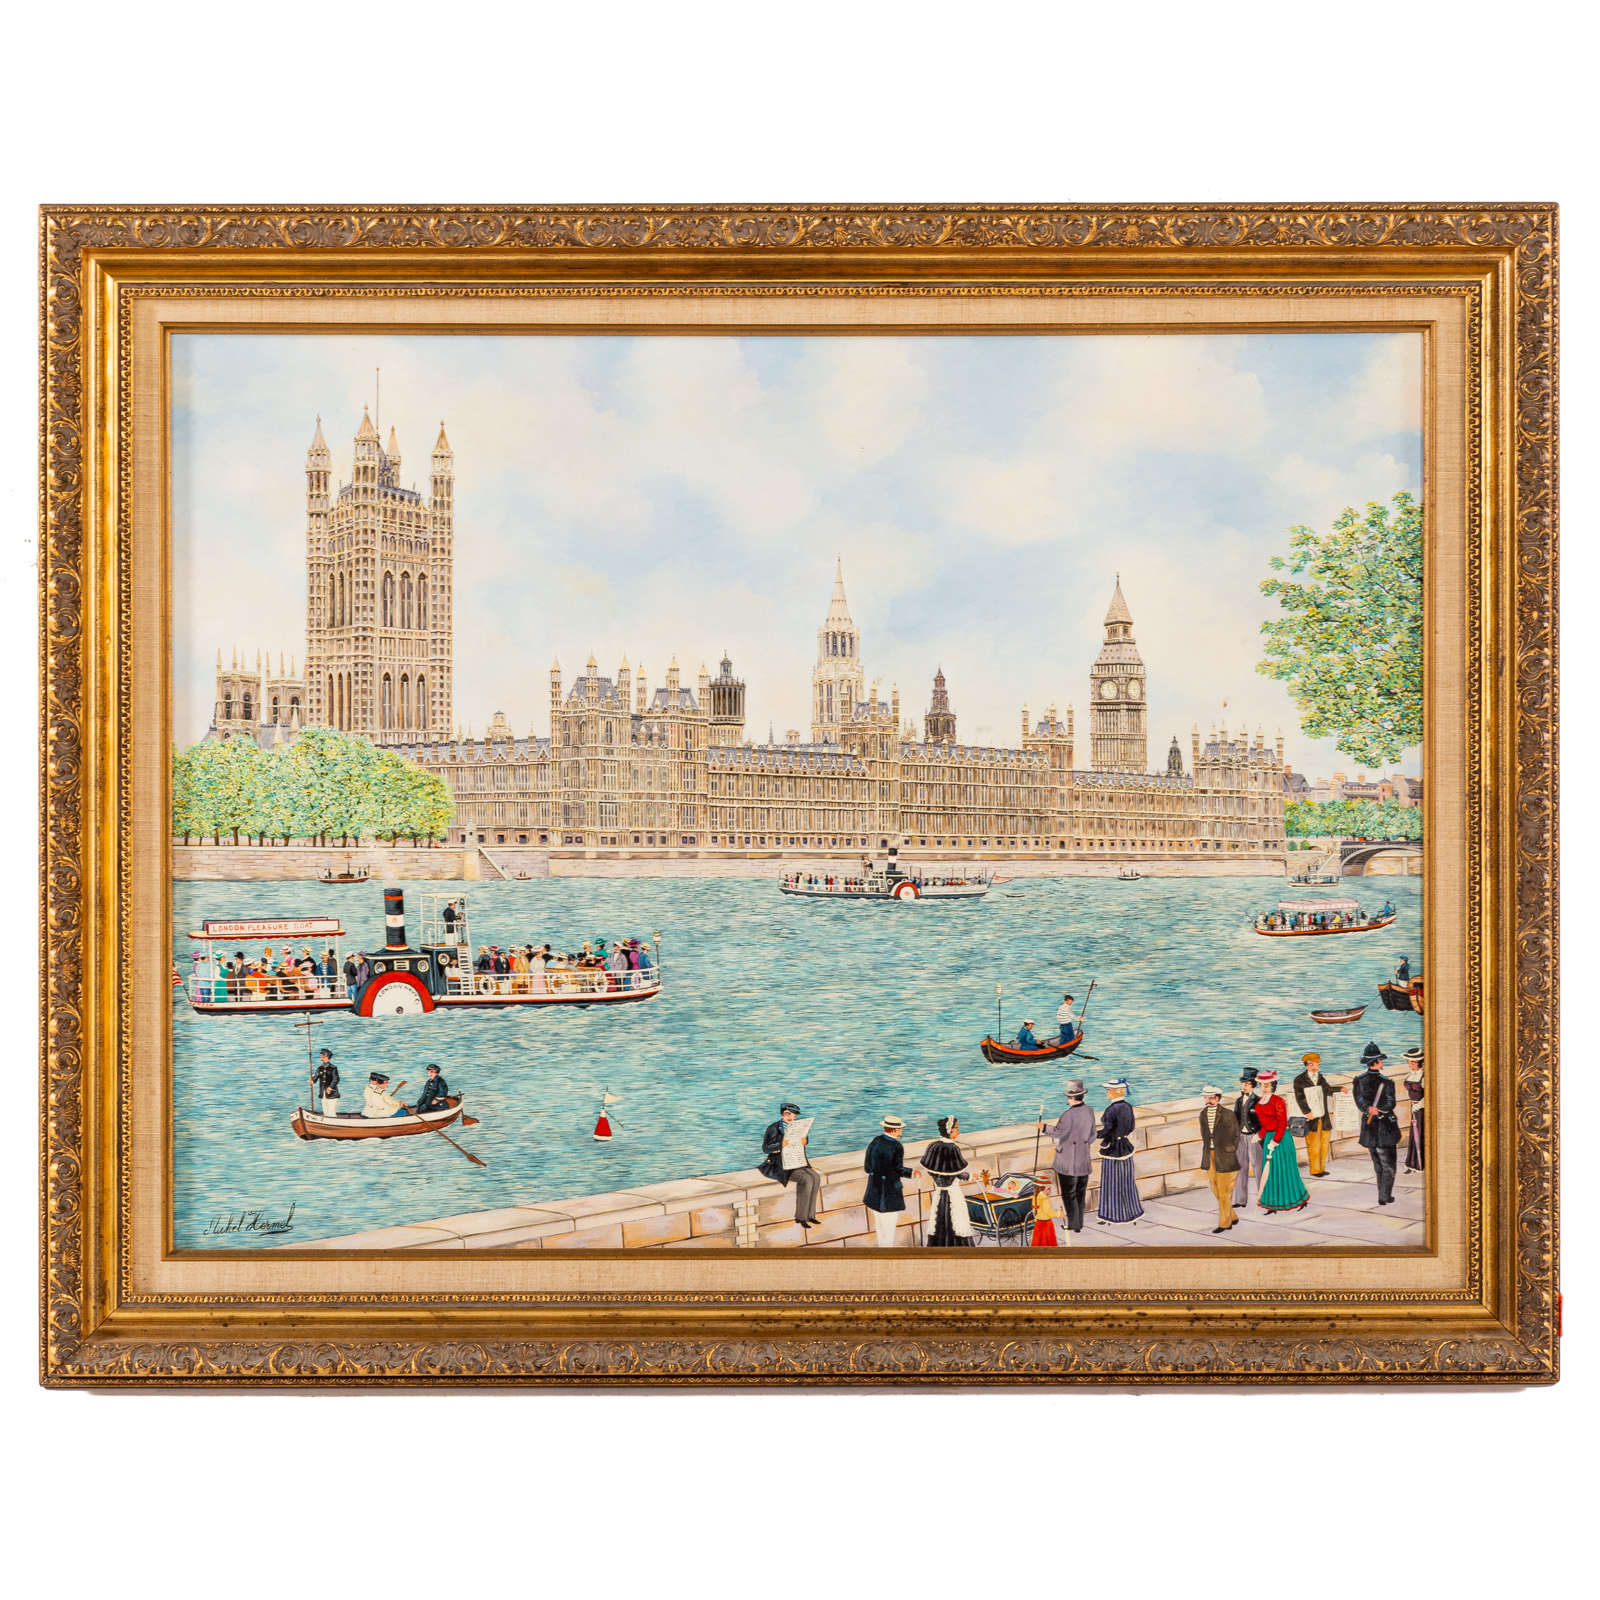 MICHEL HERMEL PALACE OF WESTMINSTER  288811